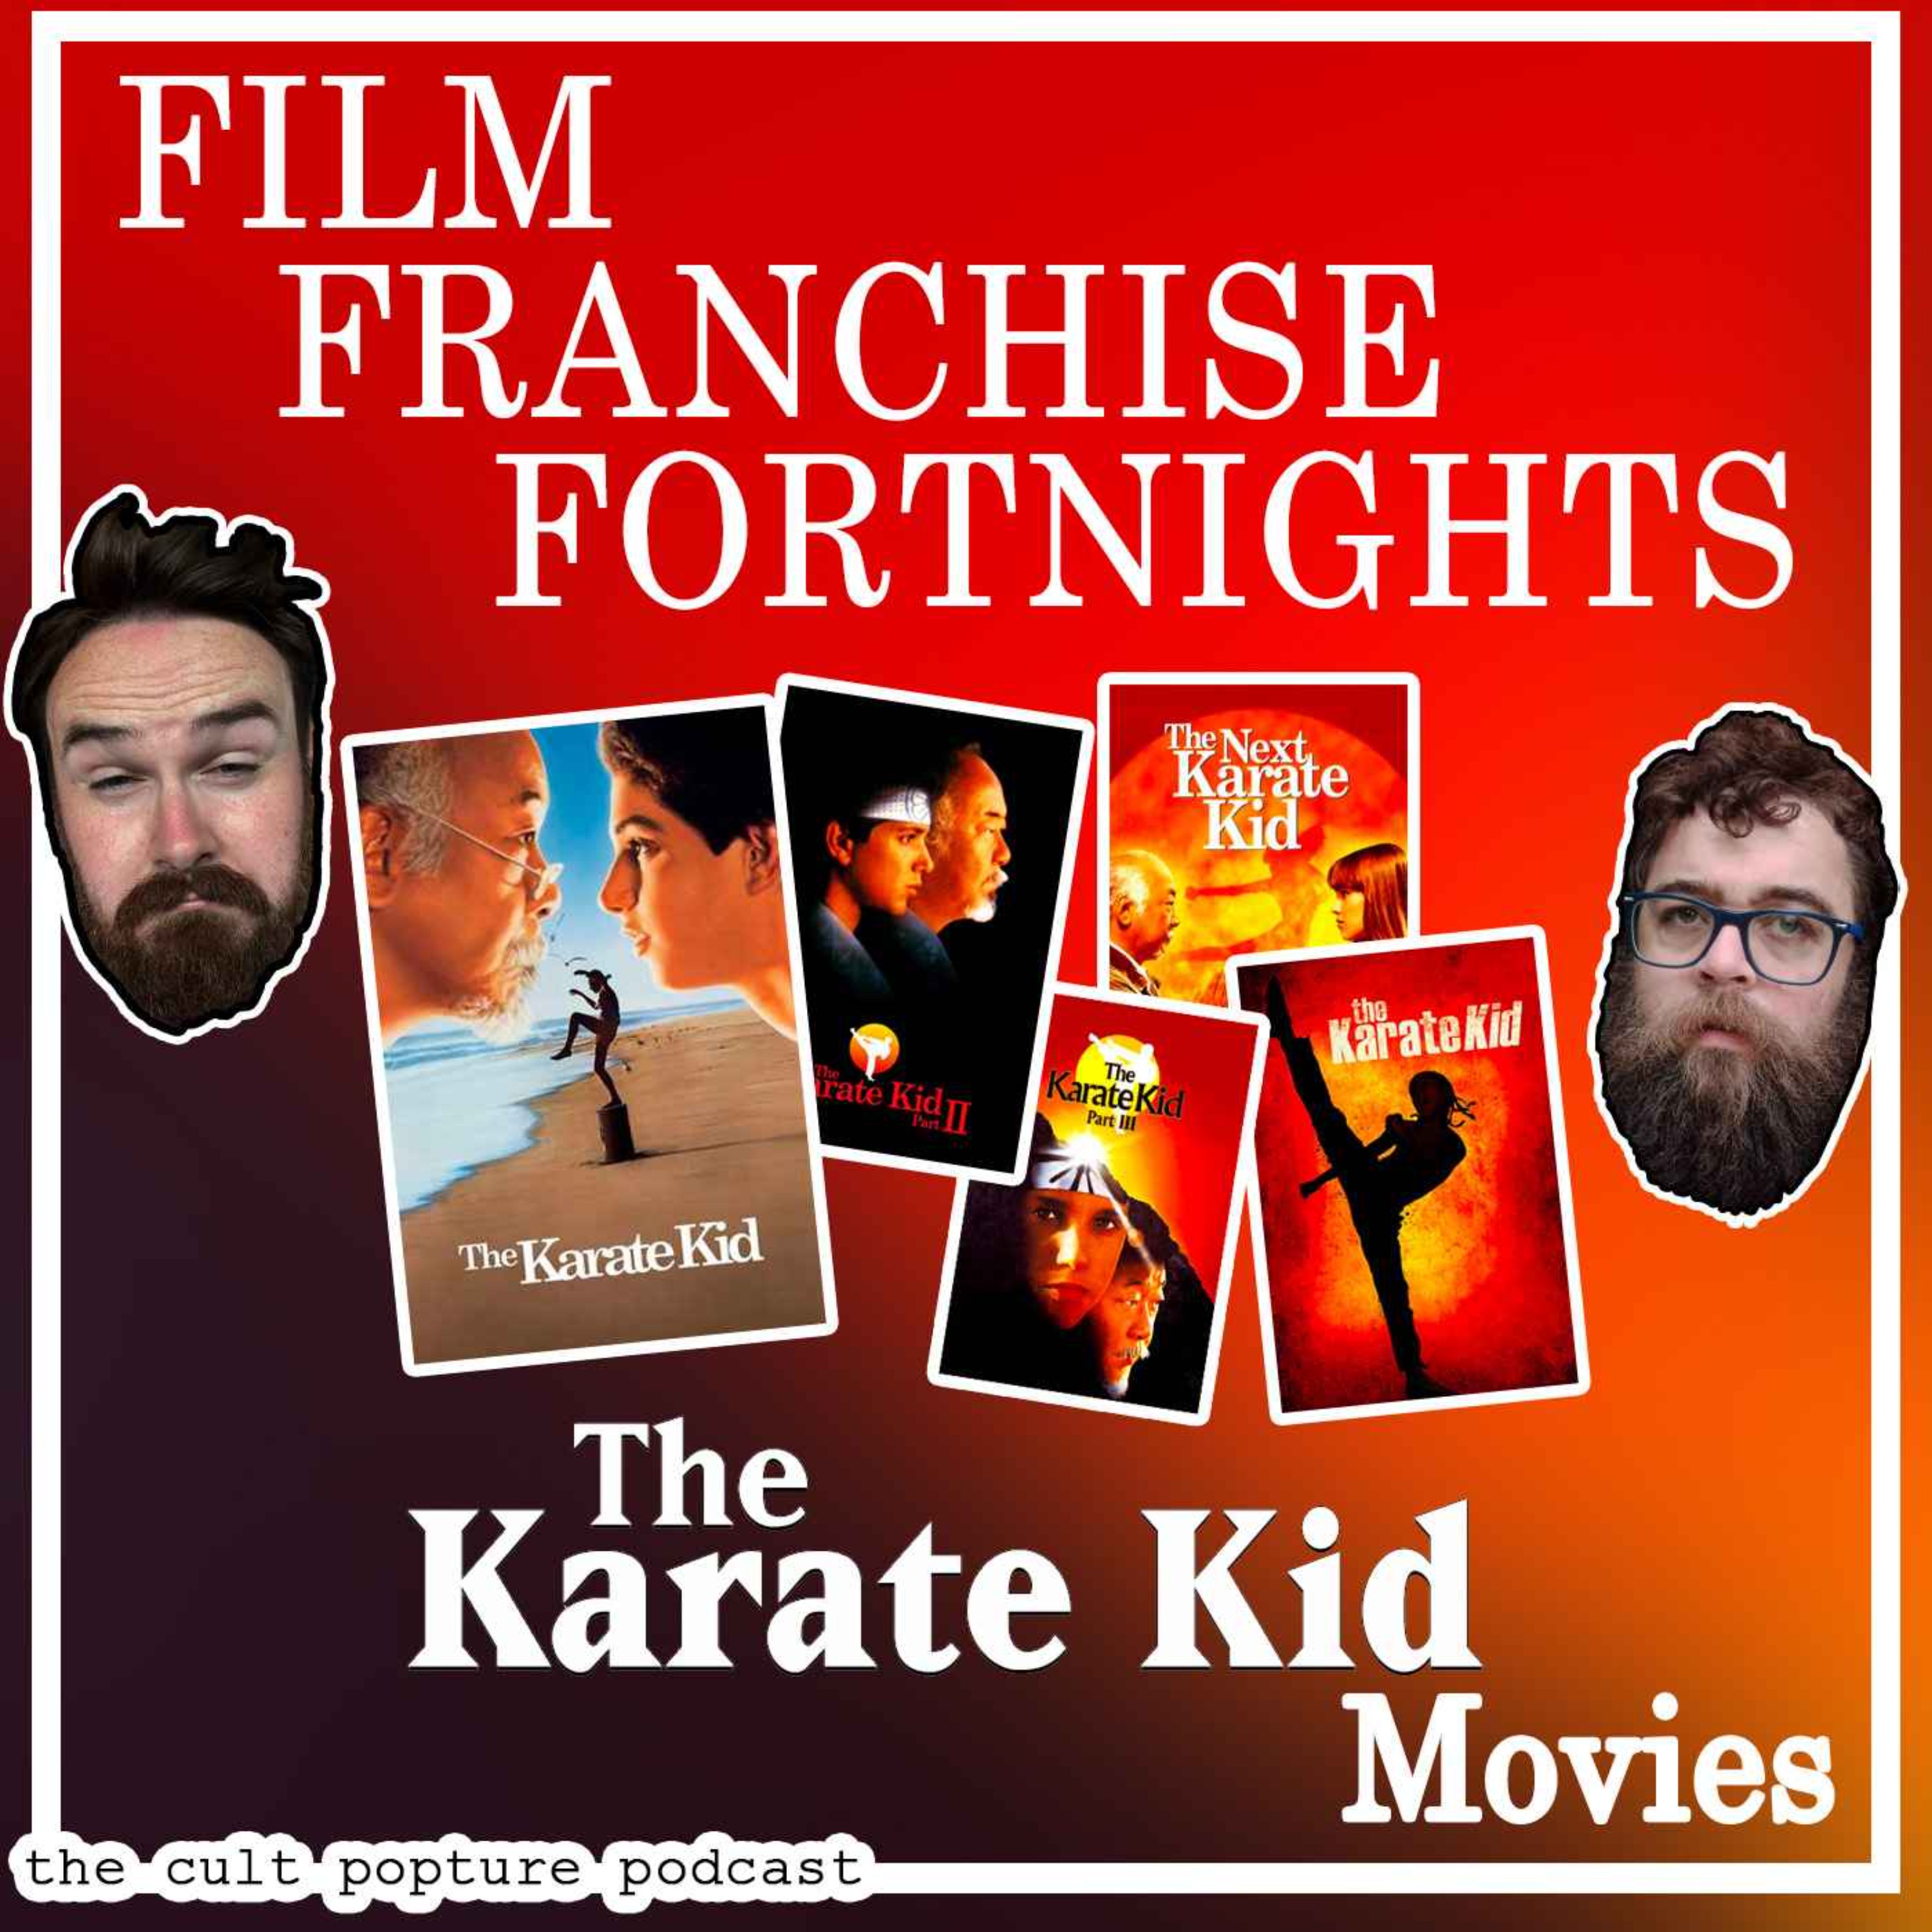 ”The Karate Kid” Movies | Film Franchise Fortnights